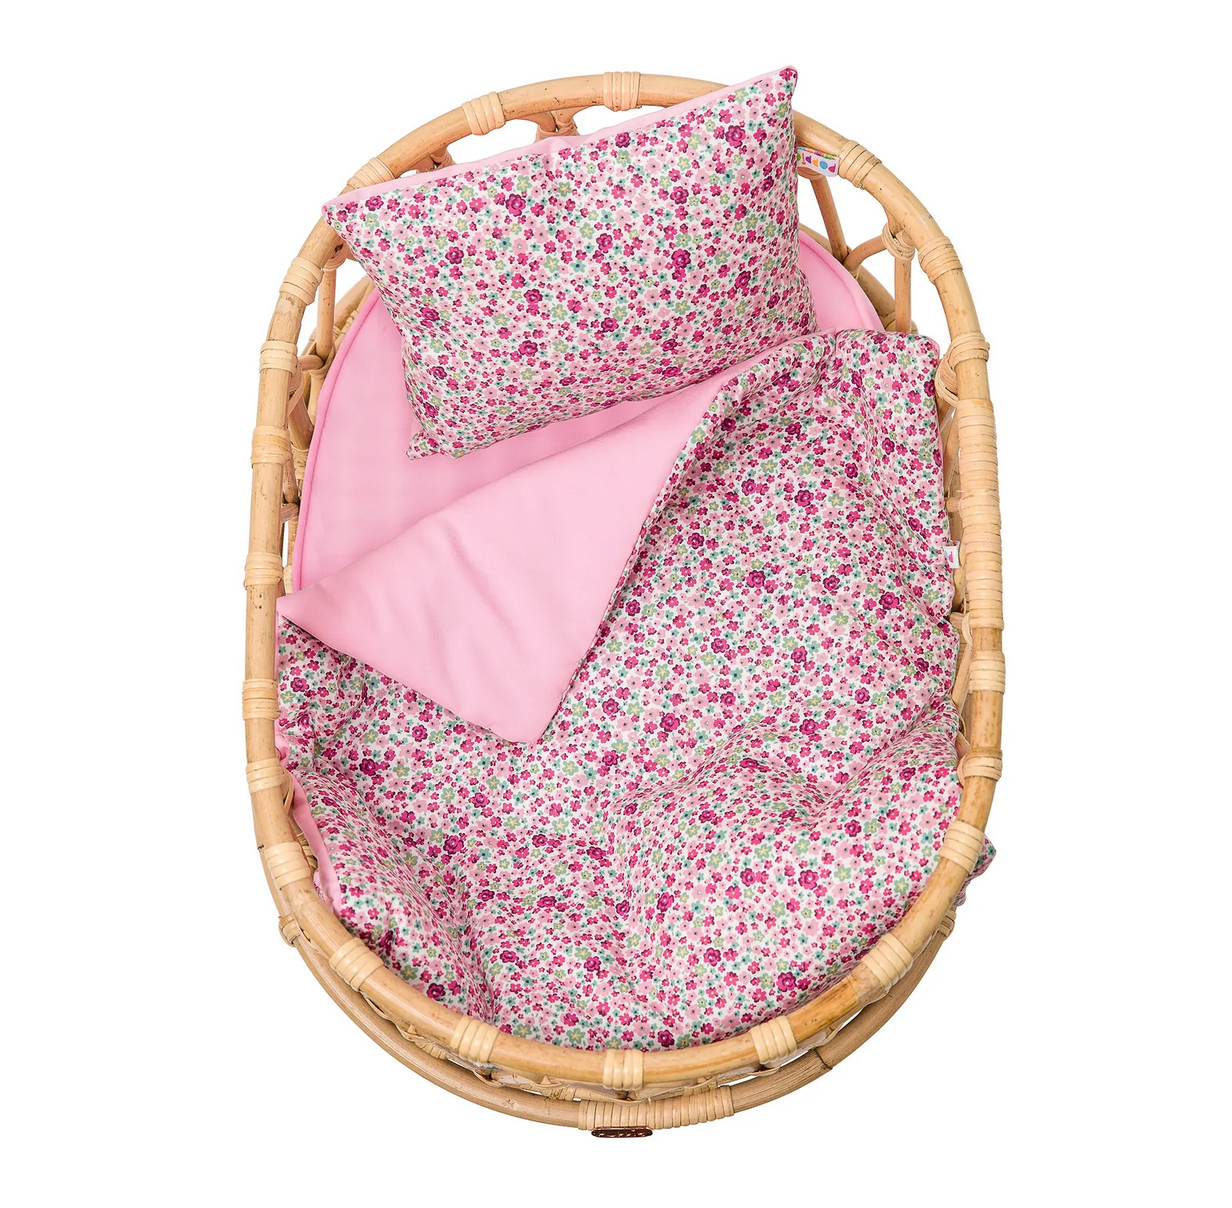 Poppie Toys Rattan Doll Crib with Duvet and Pillow - Special Set